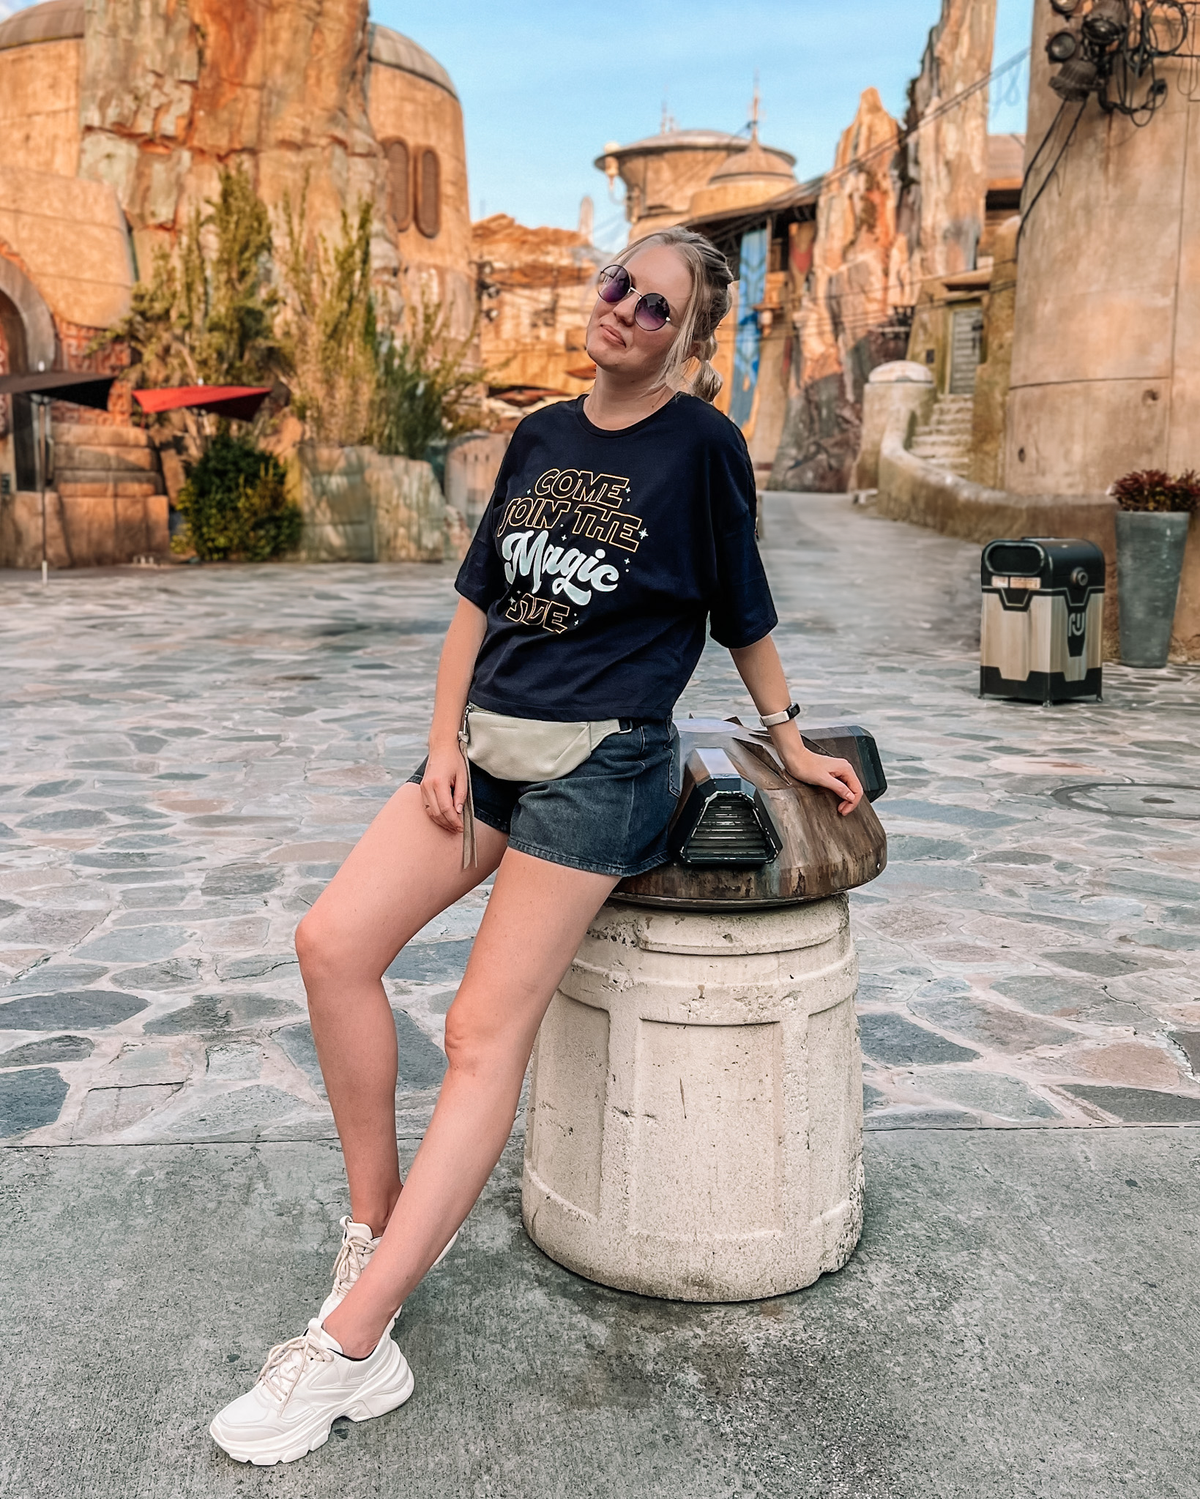 Woman in "Come Join the Magic Side" top at Star Wars: Galaxy's Edge in Disney World.